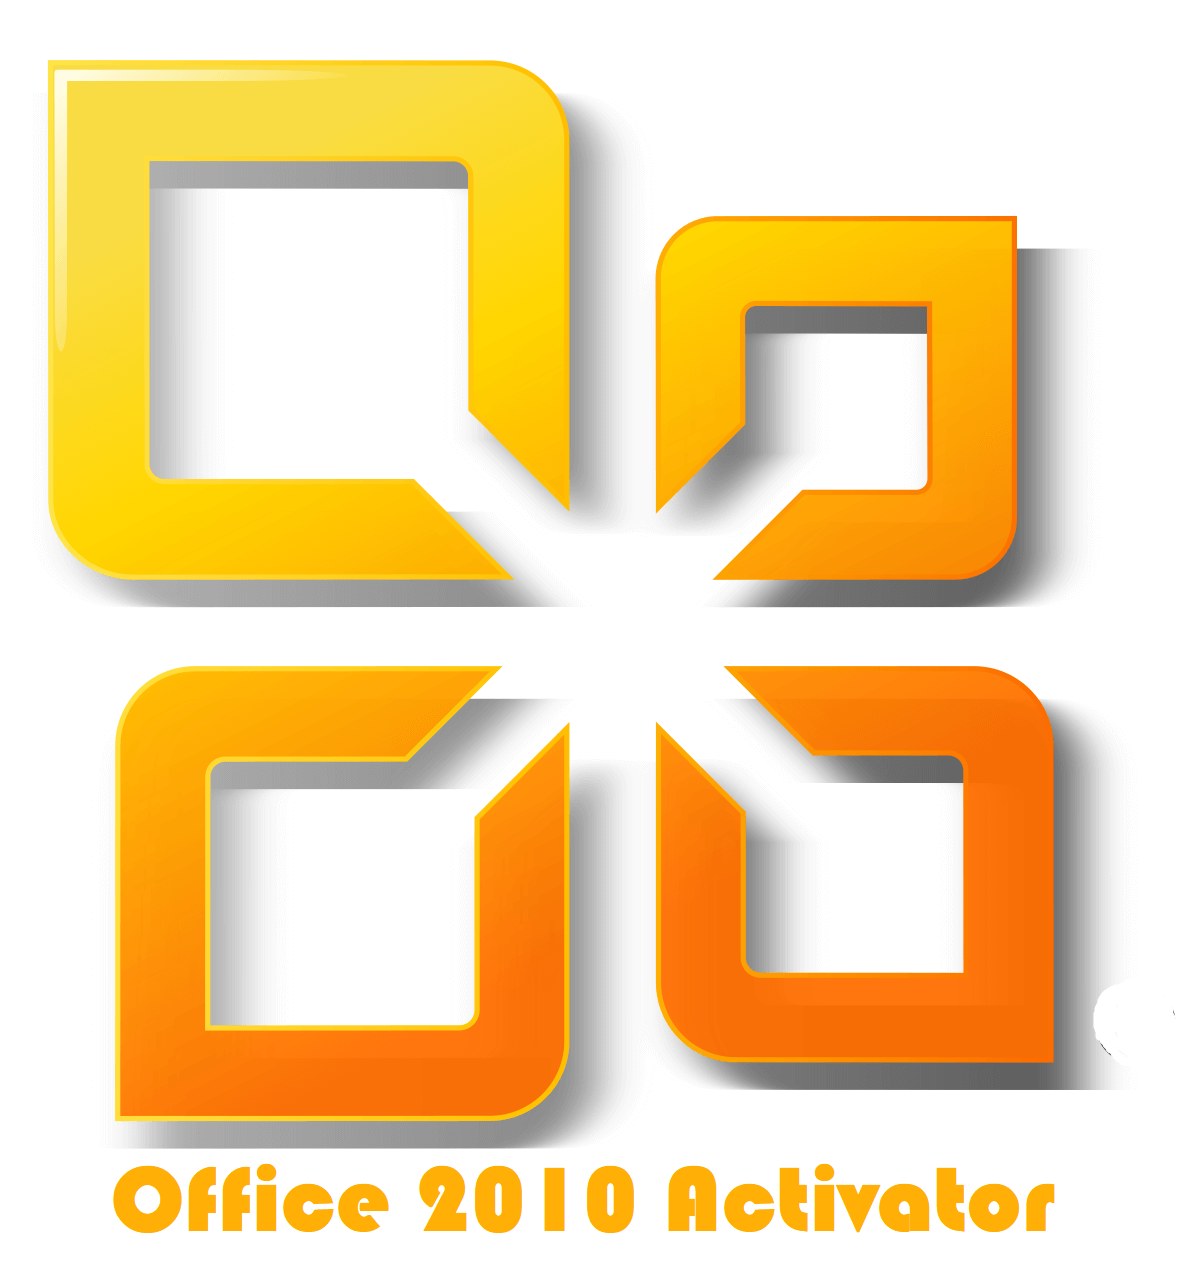 Microsoft Office 2007 Activation Wizard Crack Download